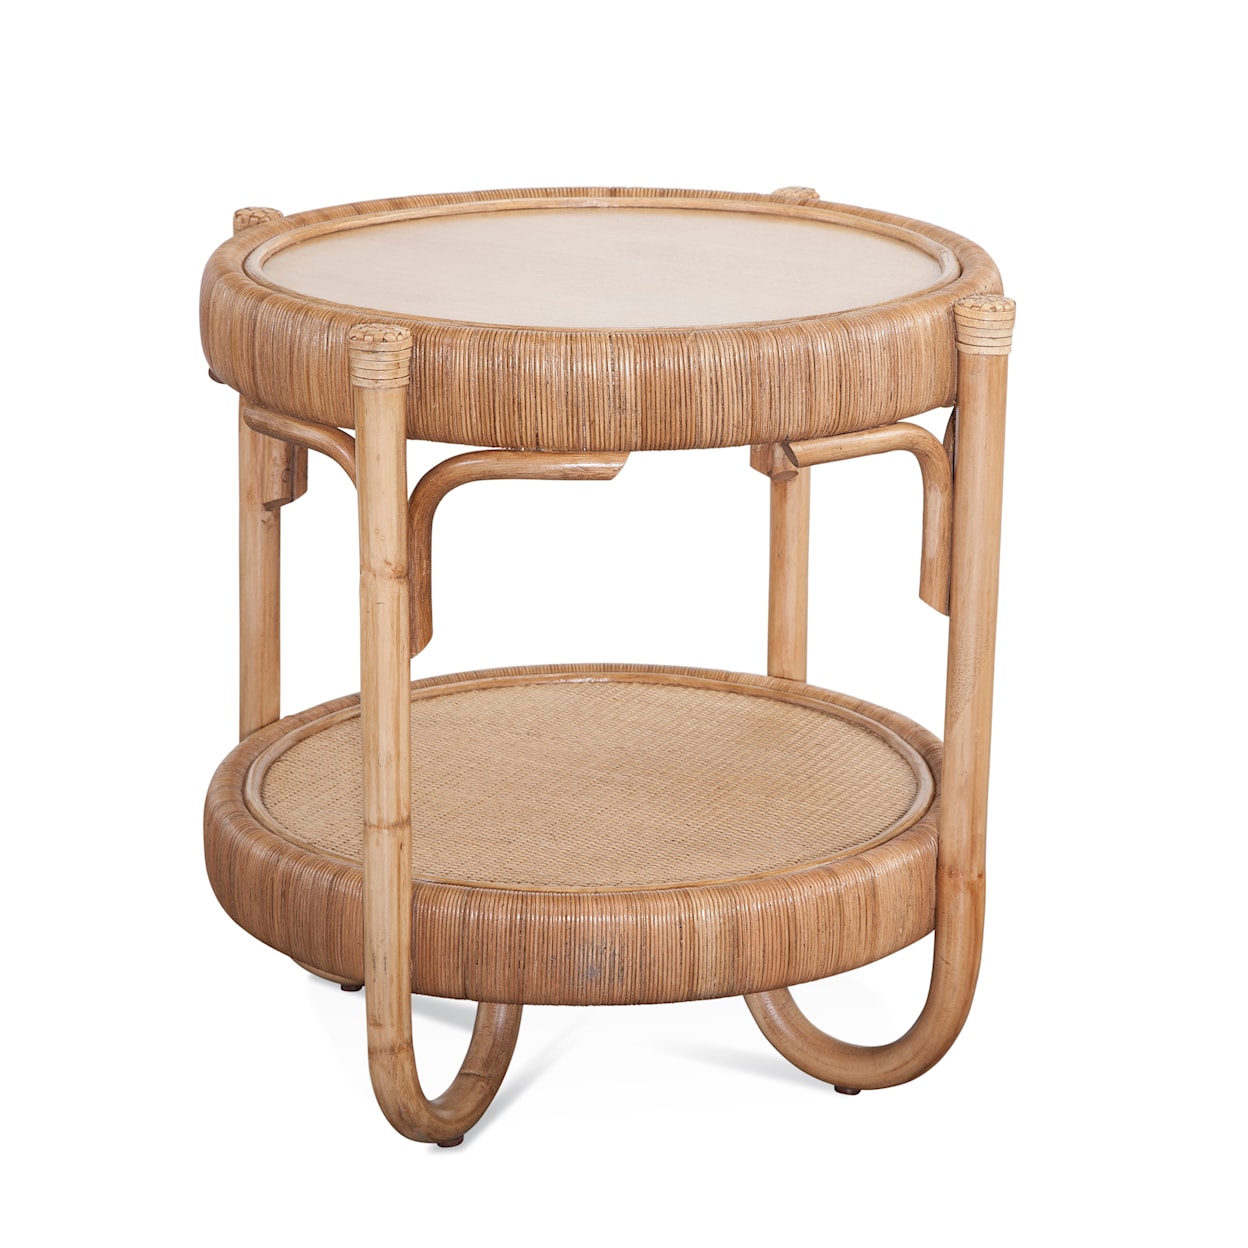 Braxton Culler Willow Creek End Table